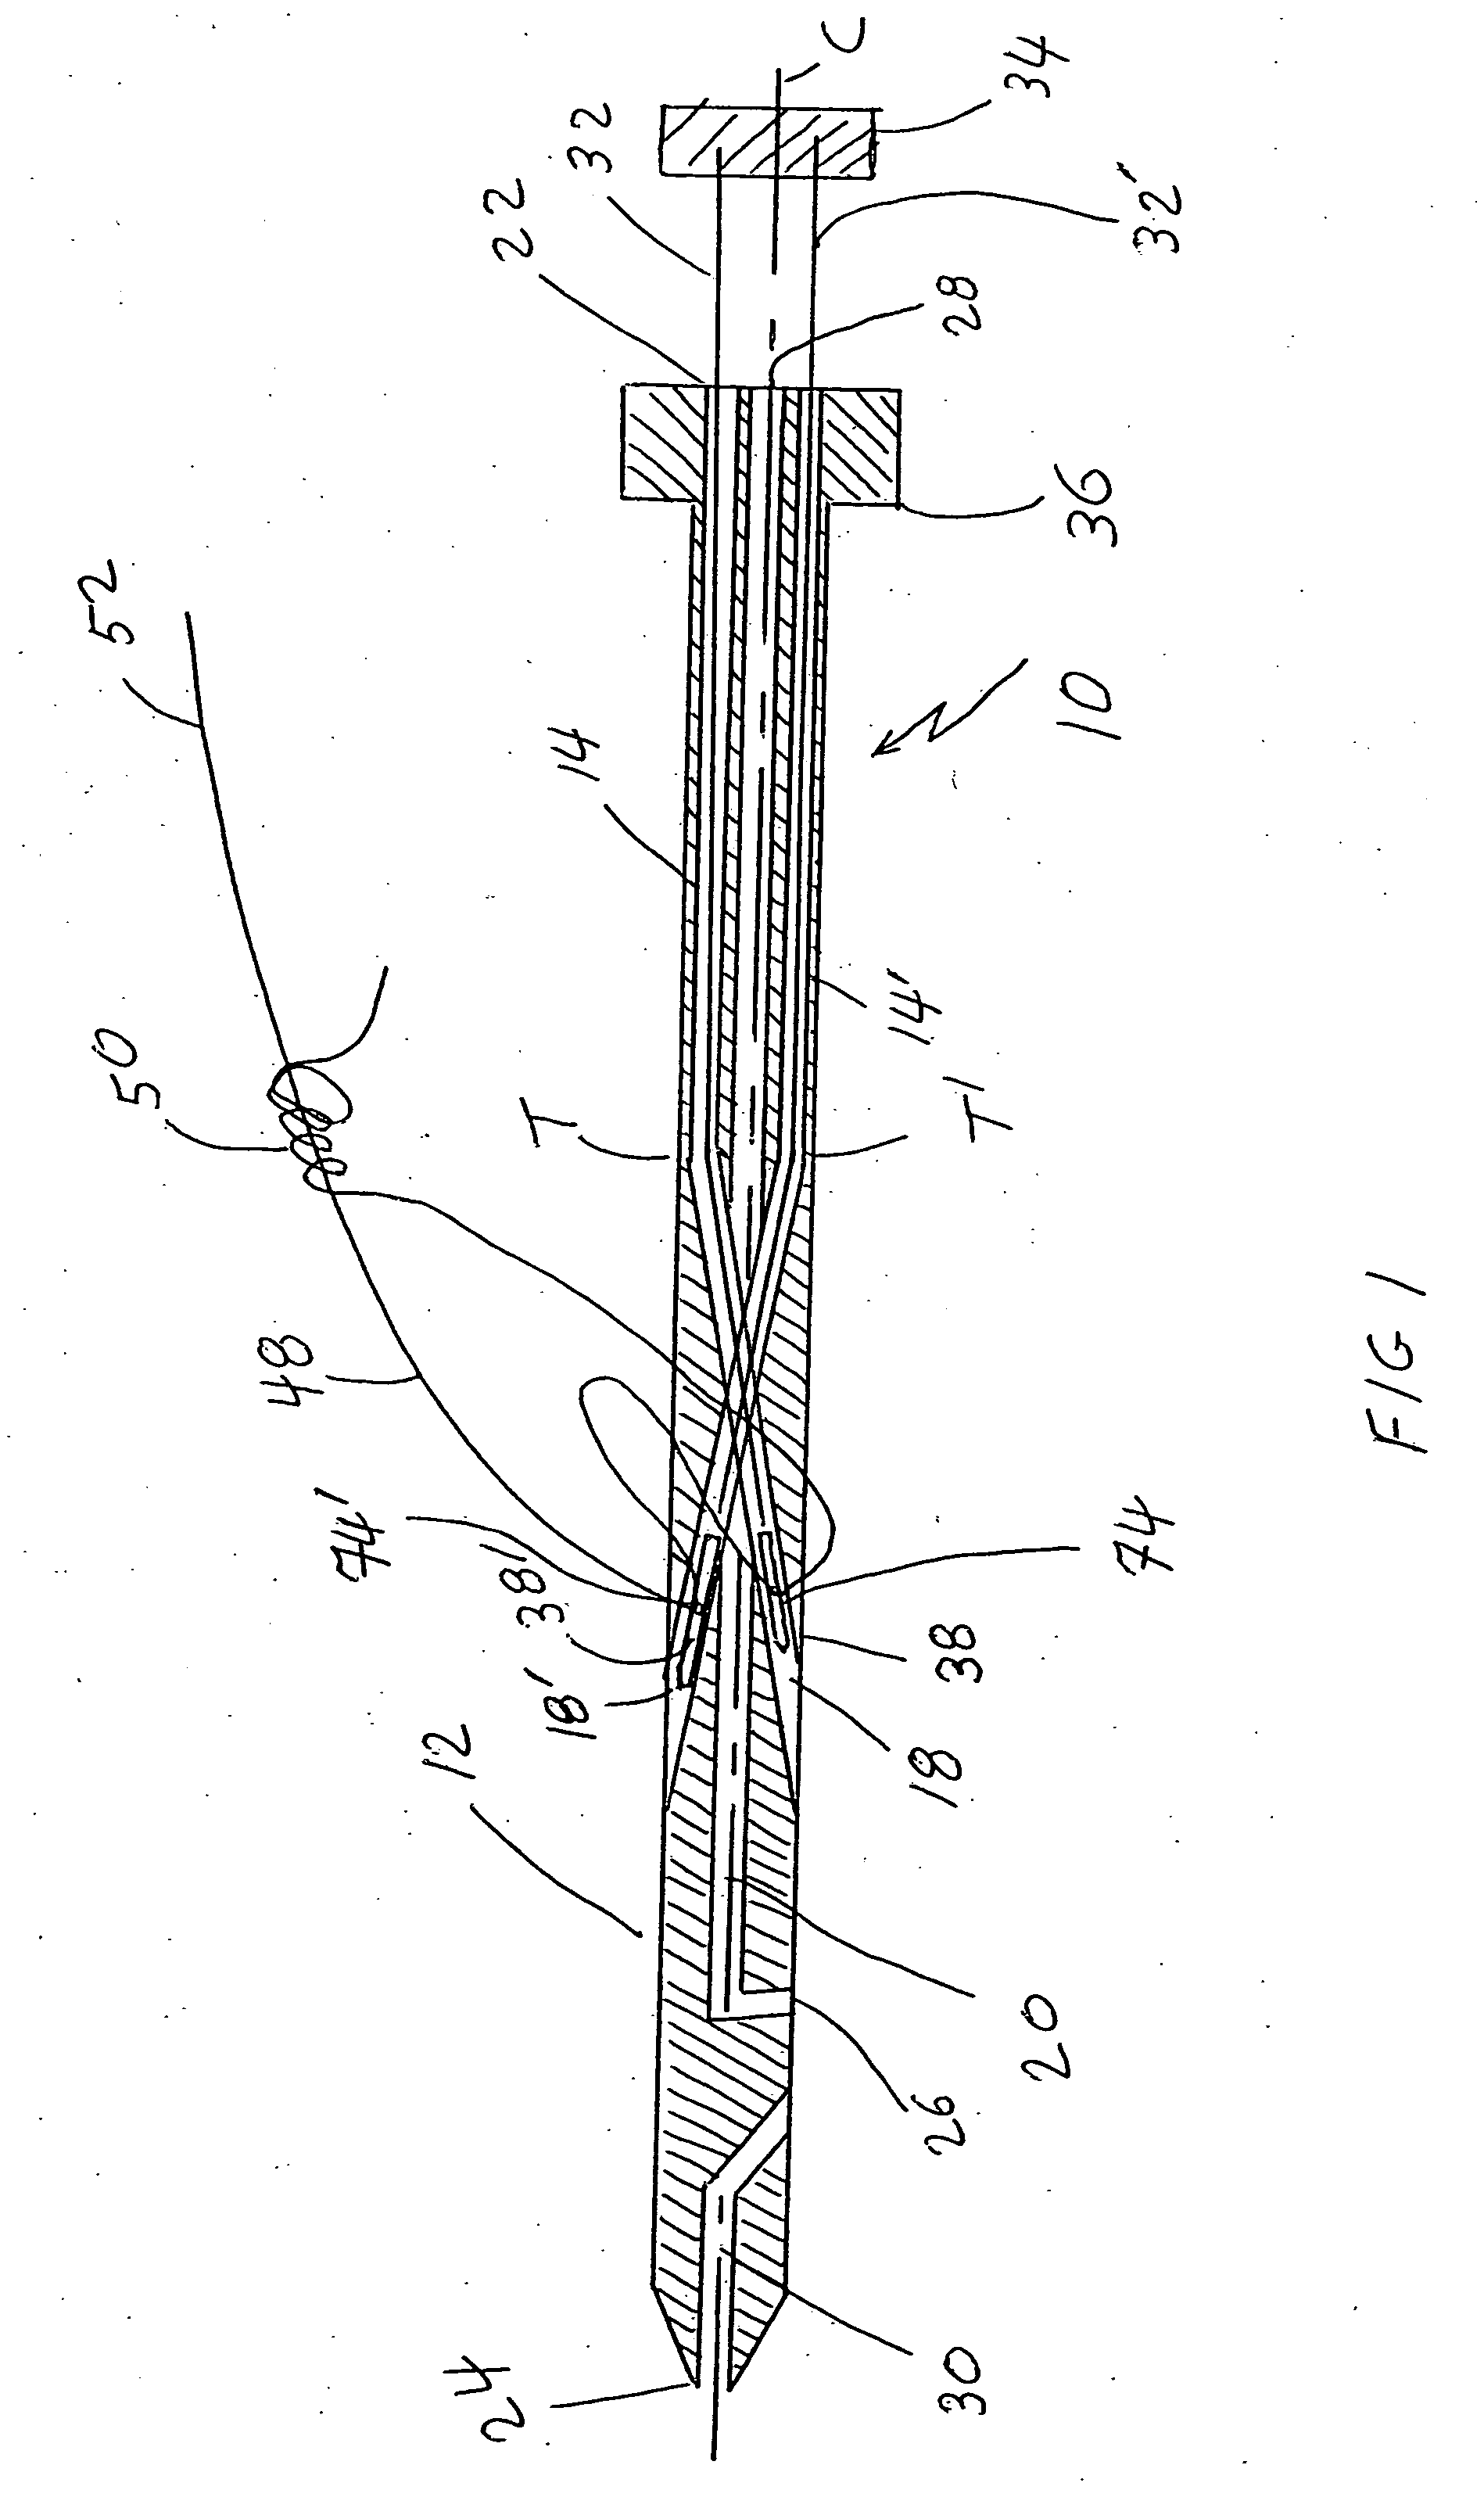 Device and method for suturing internal structures puncture wounds